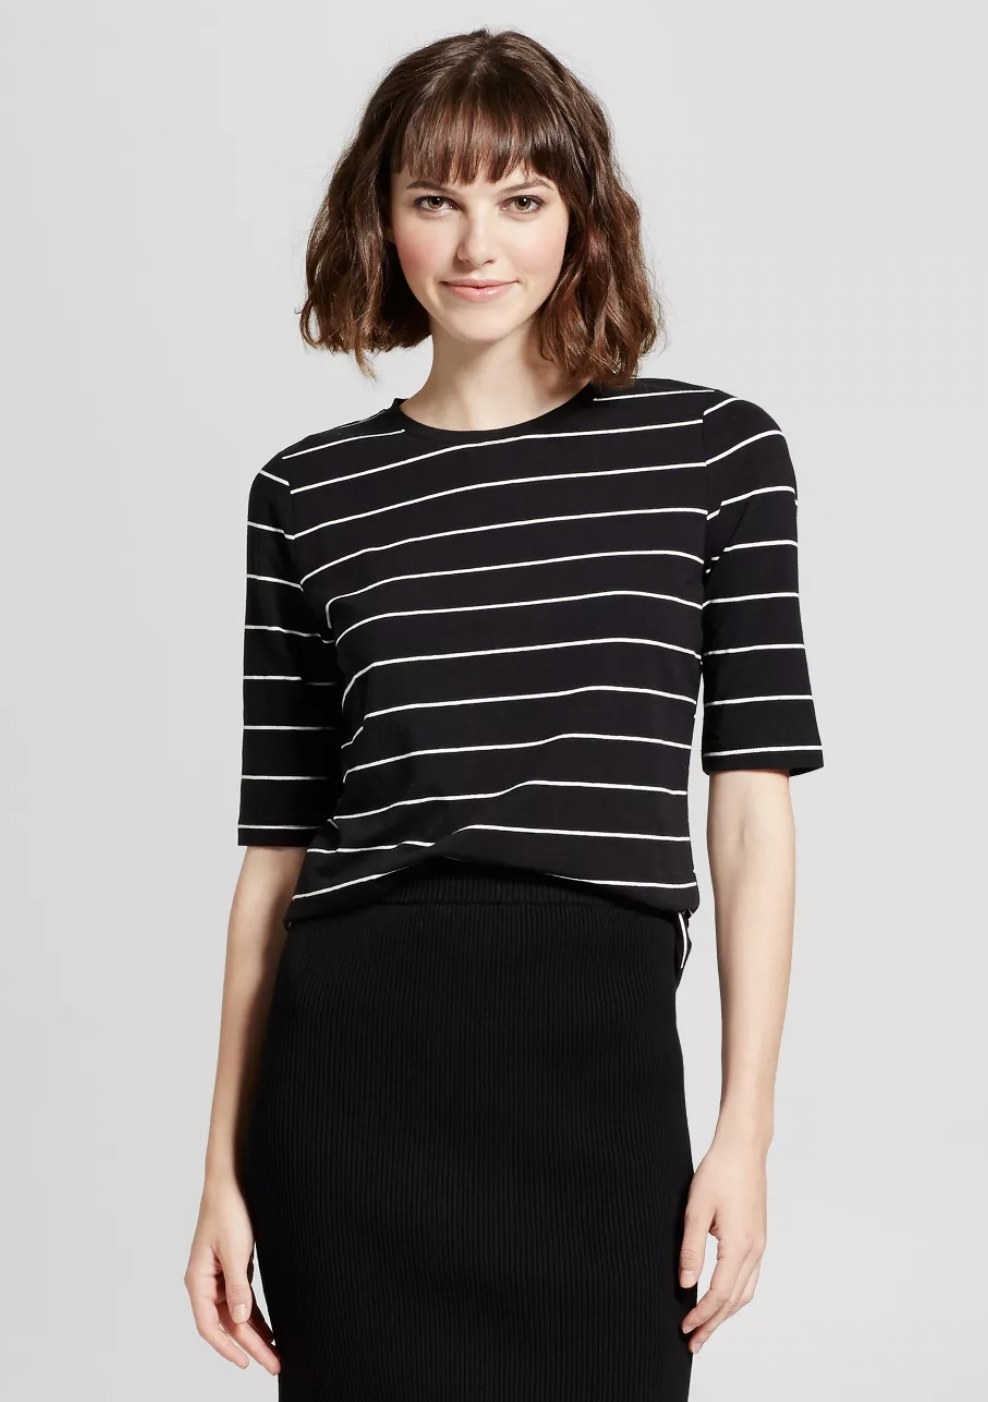 a person wearing the tee in black with thin, white stripes